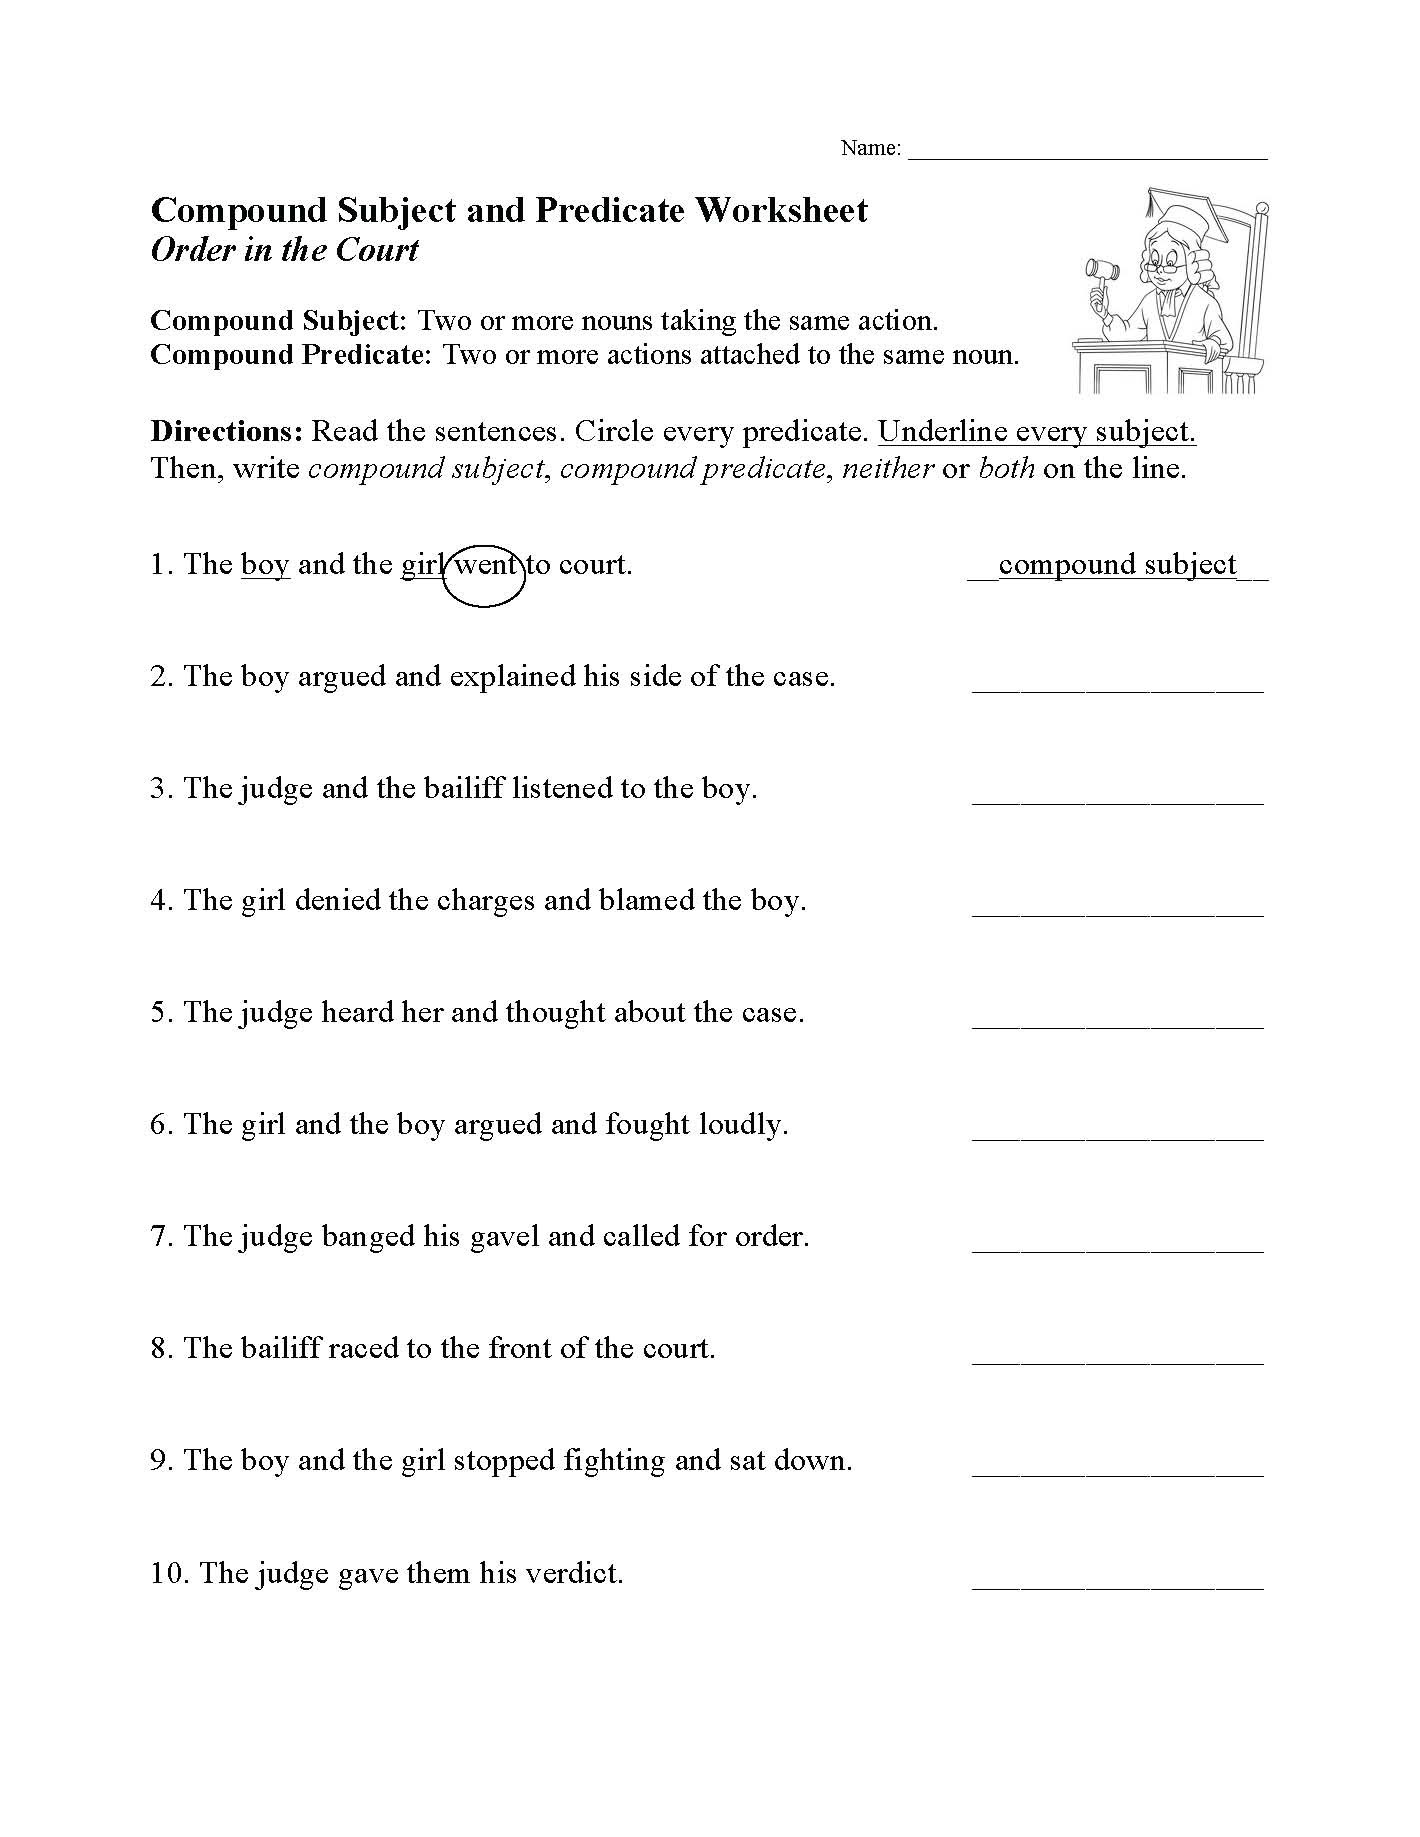 Compound Subject and Predicate Worksheet  Sentence Structure Activity For Subject Predicate Worksheet Pdf